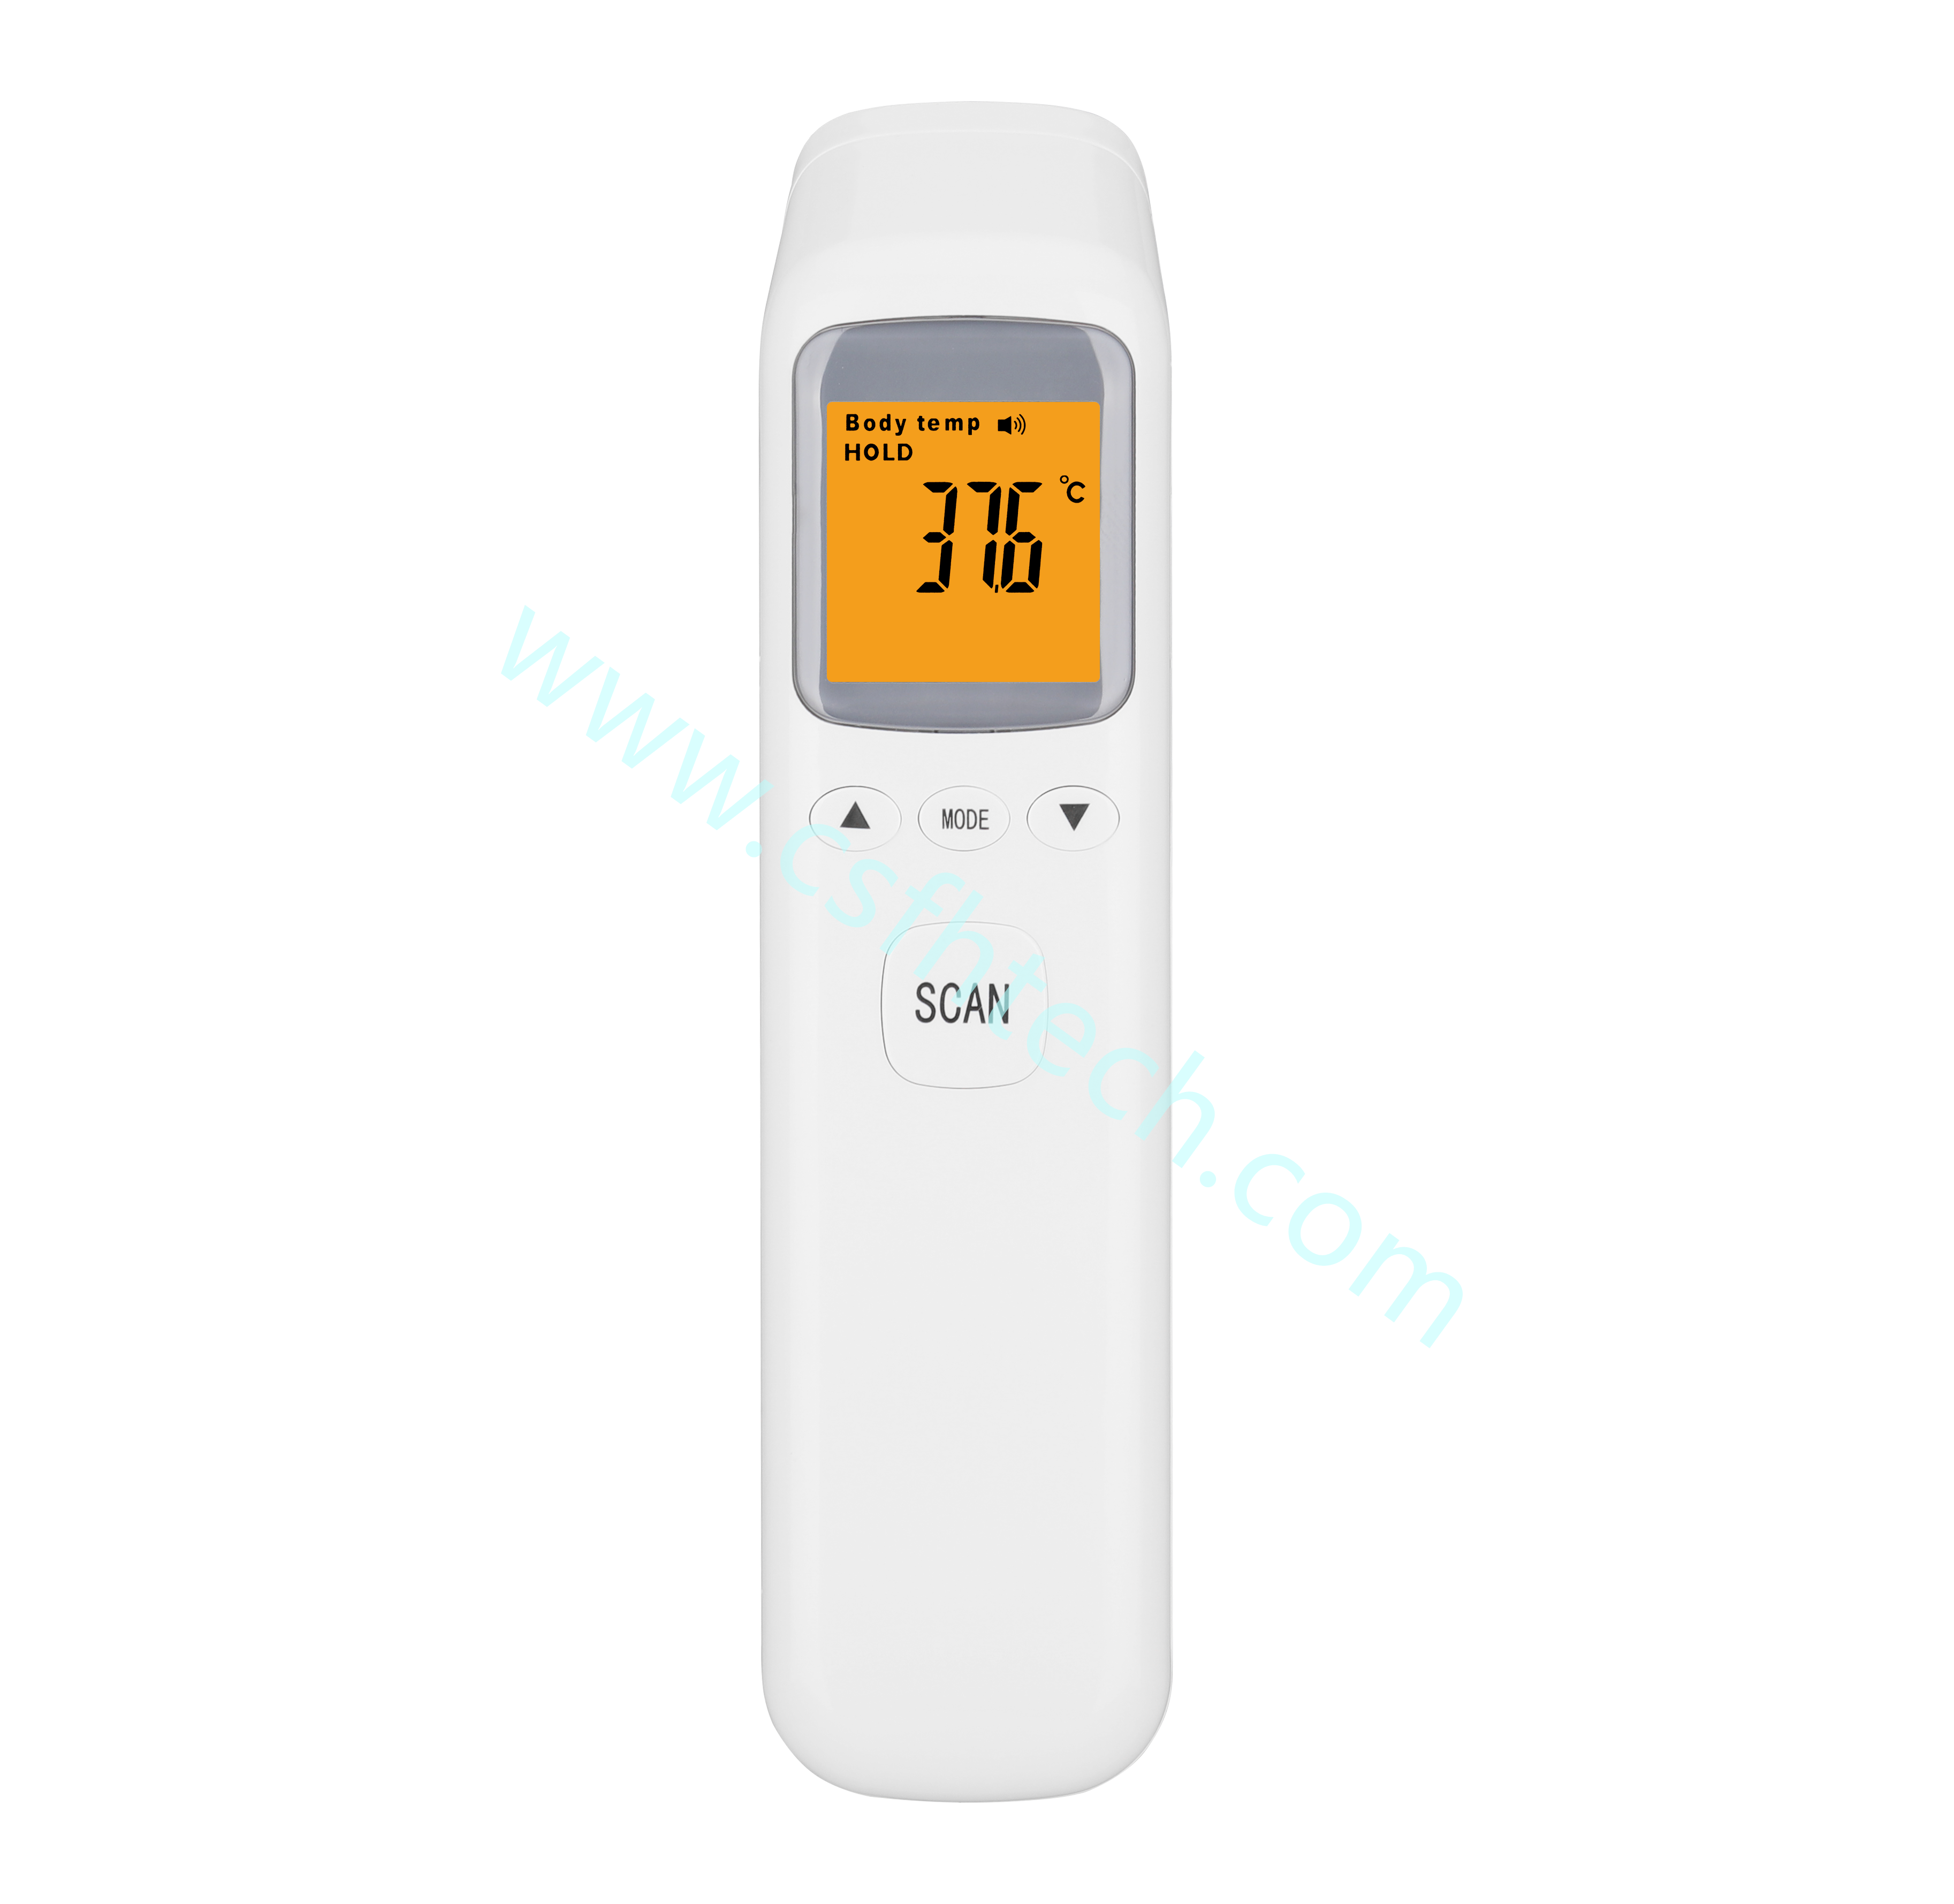 Globleseller Infrared Forehead Digital Thermometer Gun IR Laser Non Contact Thermometer with 3 Color Backlight Display for Baby Adults Indoor (3).png